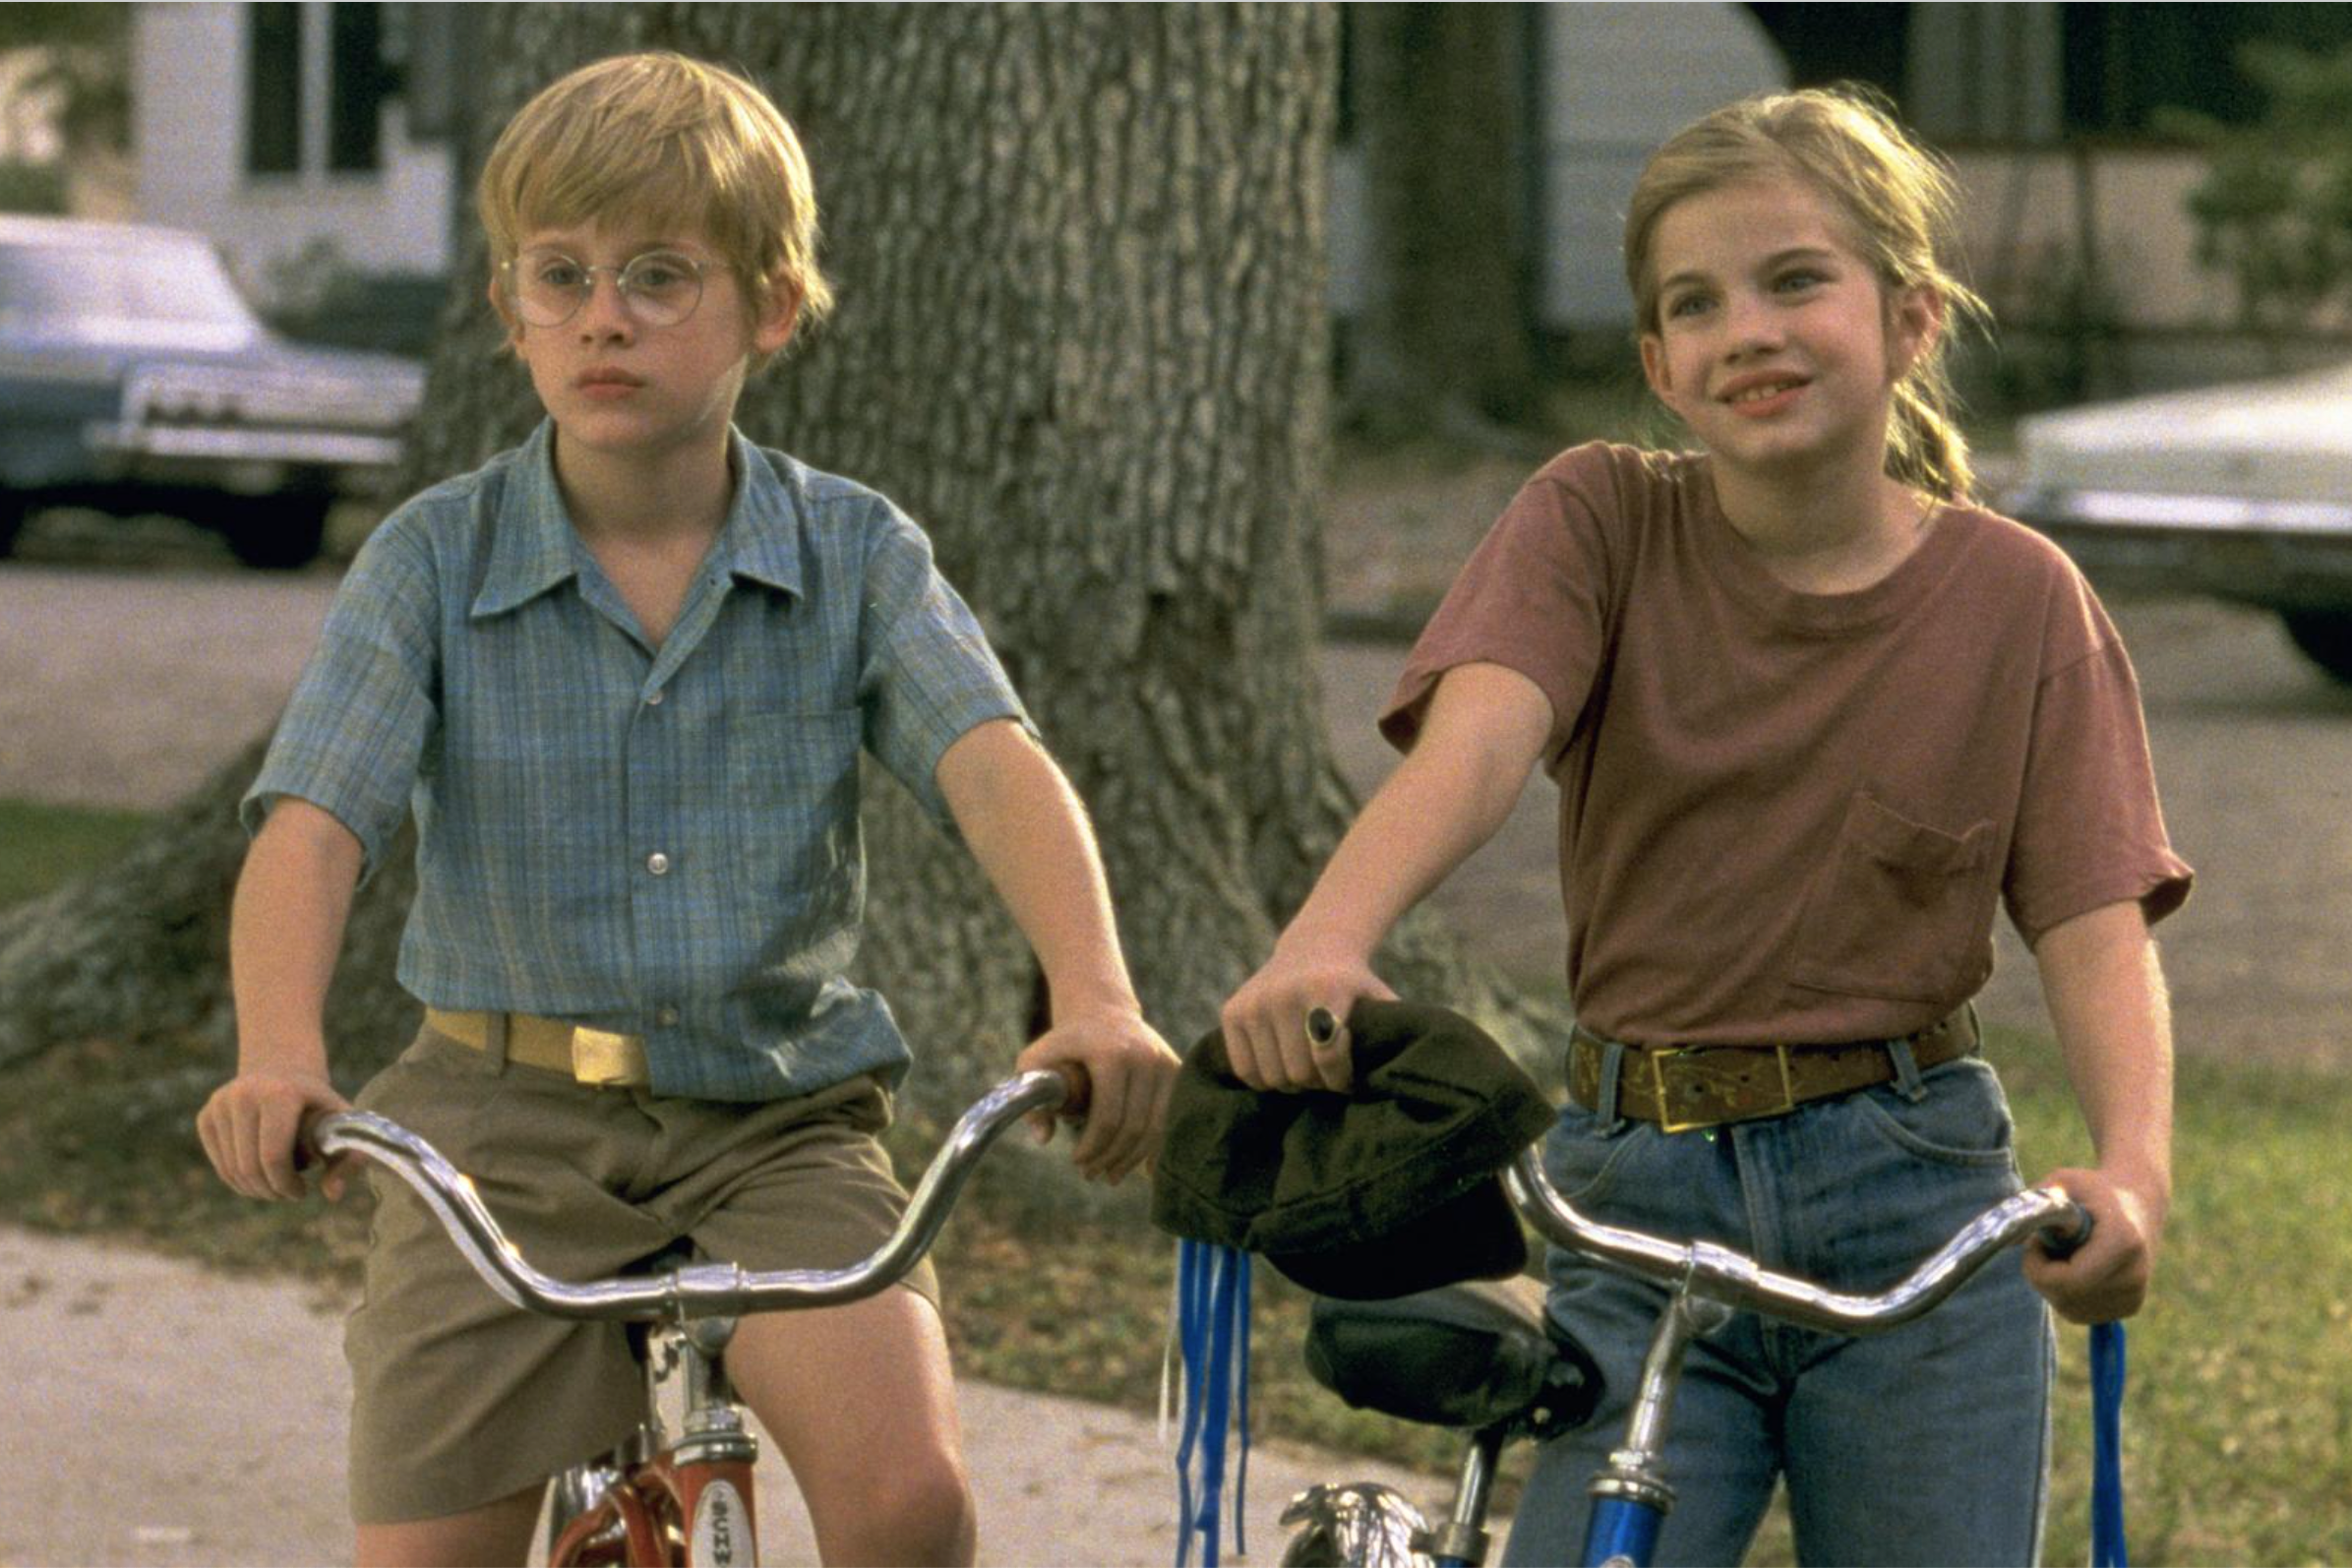 Two young children pause on the sidewalk on their bikes: on the left a young blonde boy with glasses and a patterned button down (a young Macaulay Culkin), on the right a young blonde girl in a pony tail in a t-shirt and jeans (a young Anna Chlumsky).